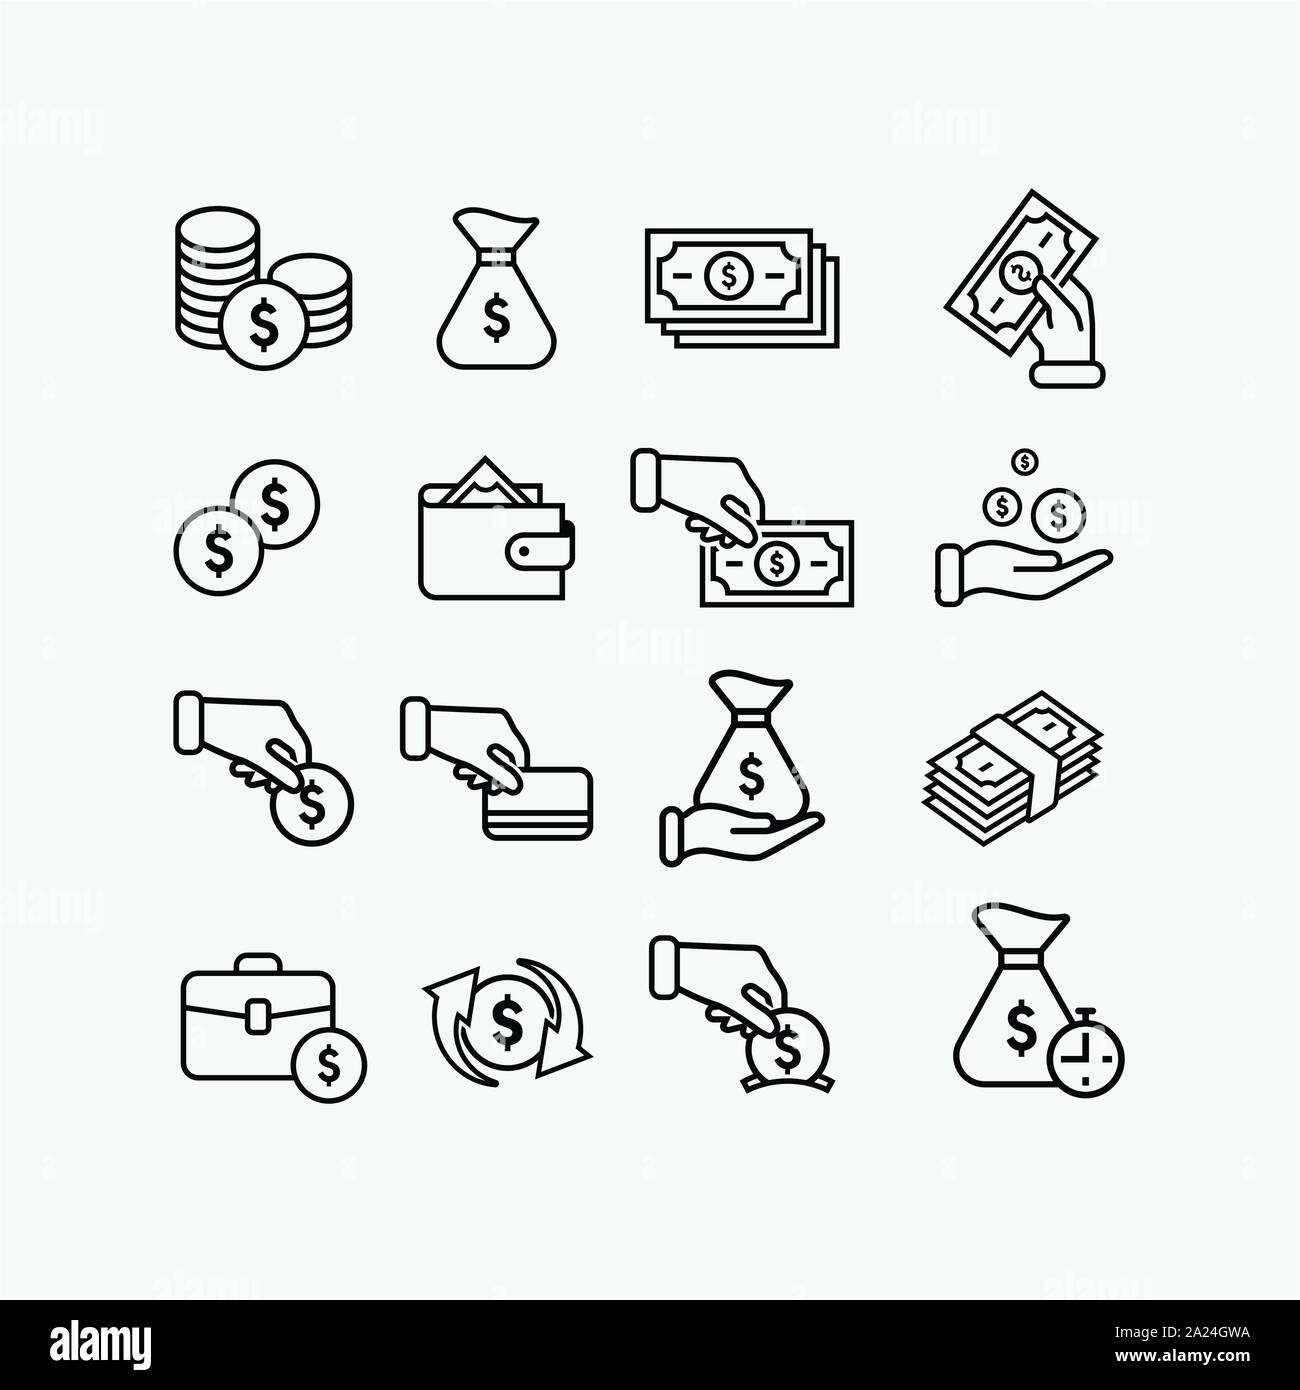 money flat icon pack, money linear icon set, earning logo icon collection, payment icon collections Stock Vector